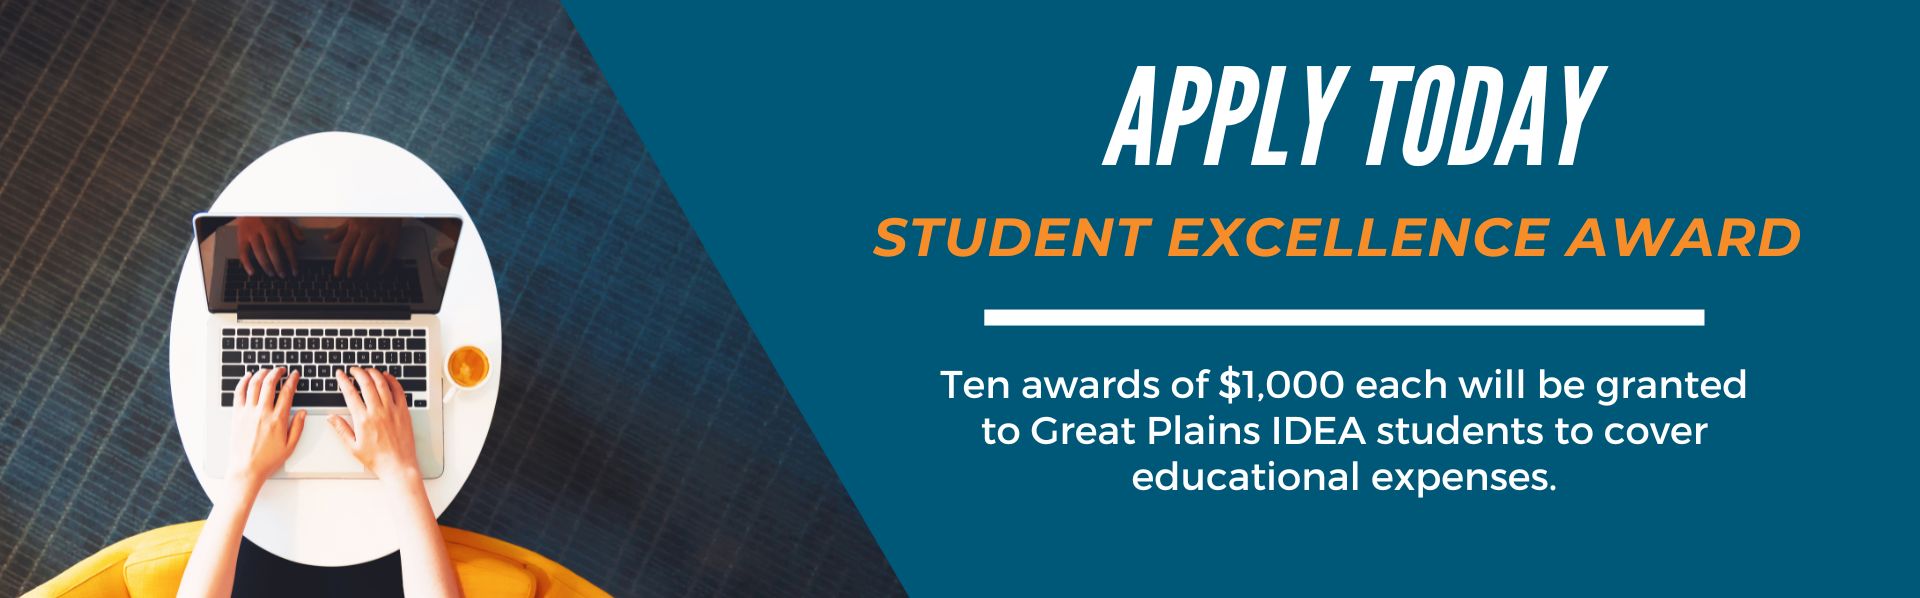 The GP IDEA Student Excellence award is a $1,000 award granted to 10 students and may be used for educational expenses.